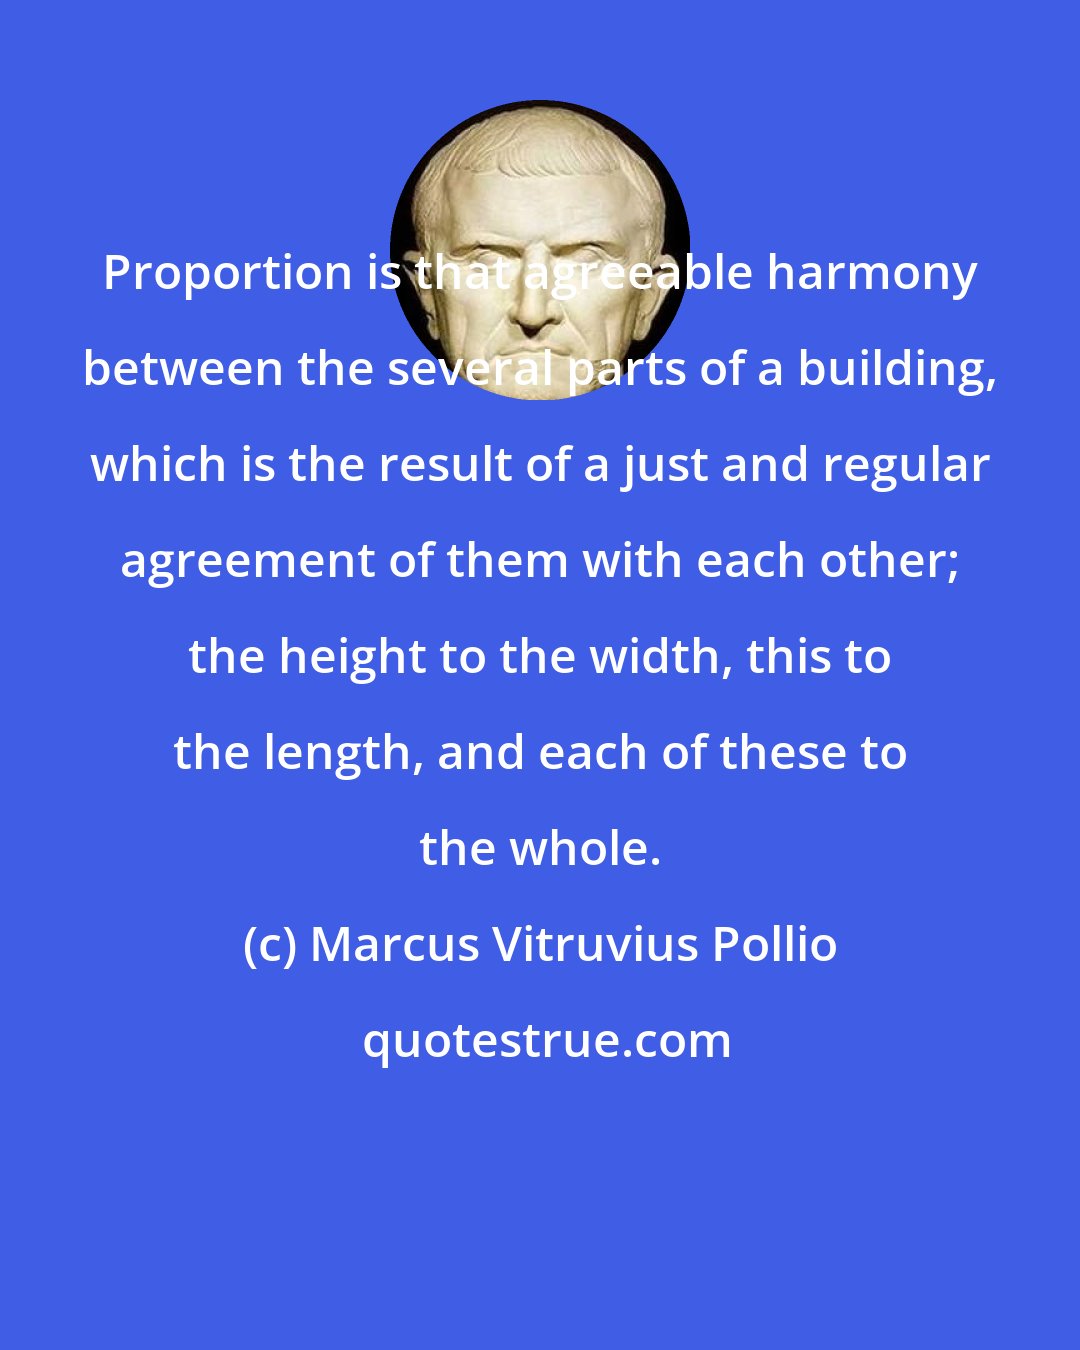 Marcus Vitruvius Pollio: Proportion is that agreeable harmony between the several parts of a building, which is the result of a just and regular agreement of them with each other; the height to the width, this to the length, and each of these to the whole.